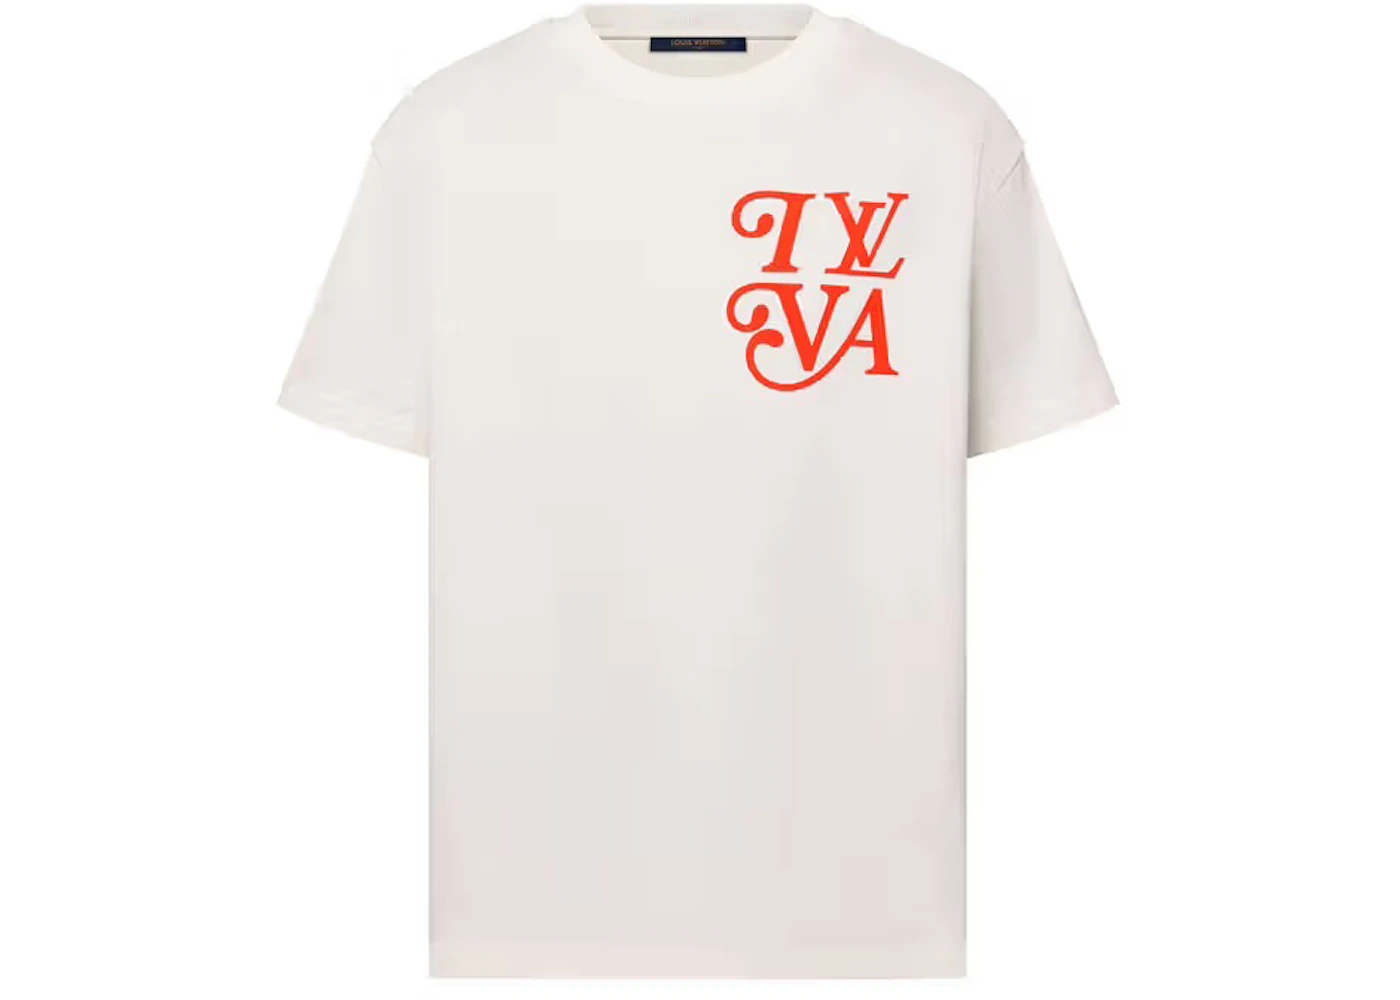 Louis Vuitton Something in The Water I LV VA Printed T-Shirt